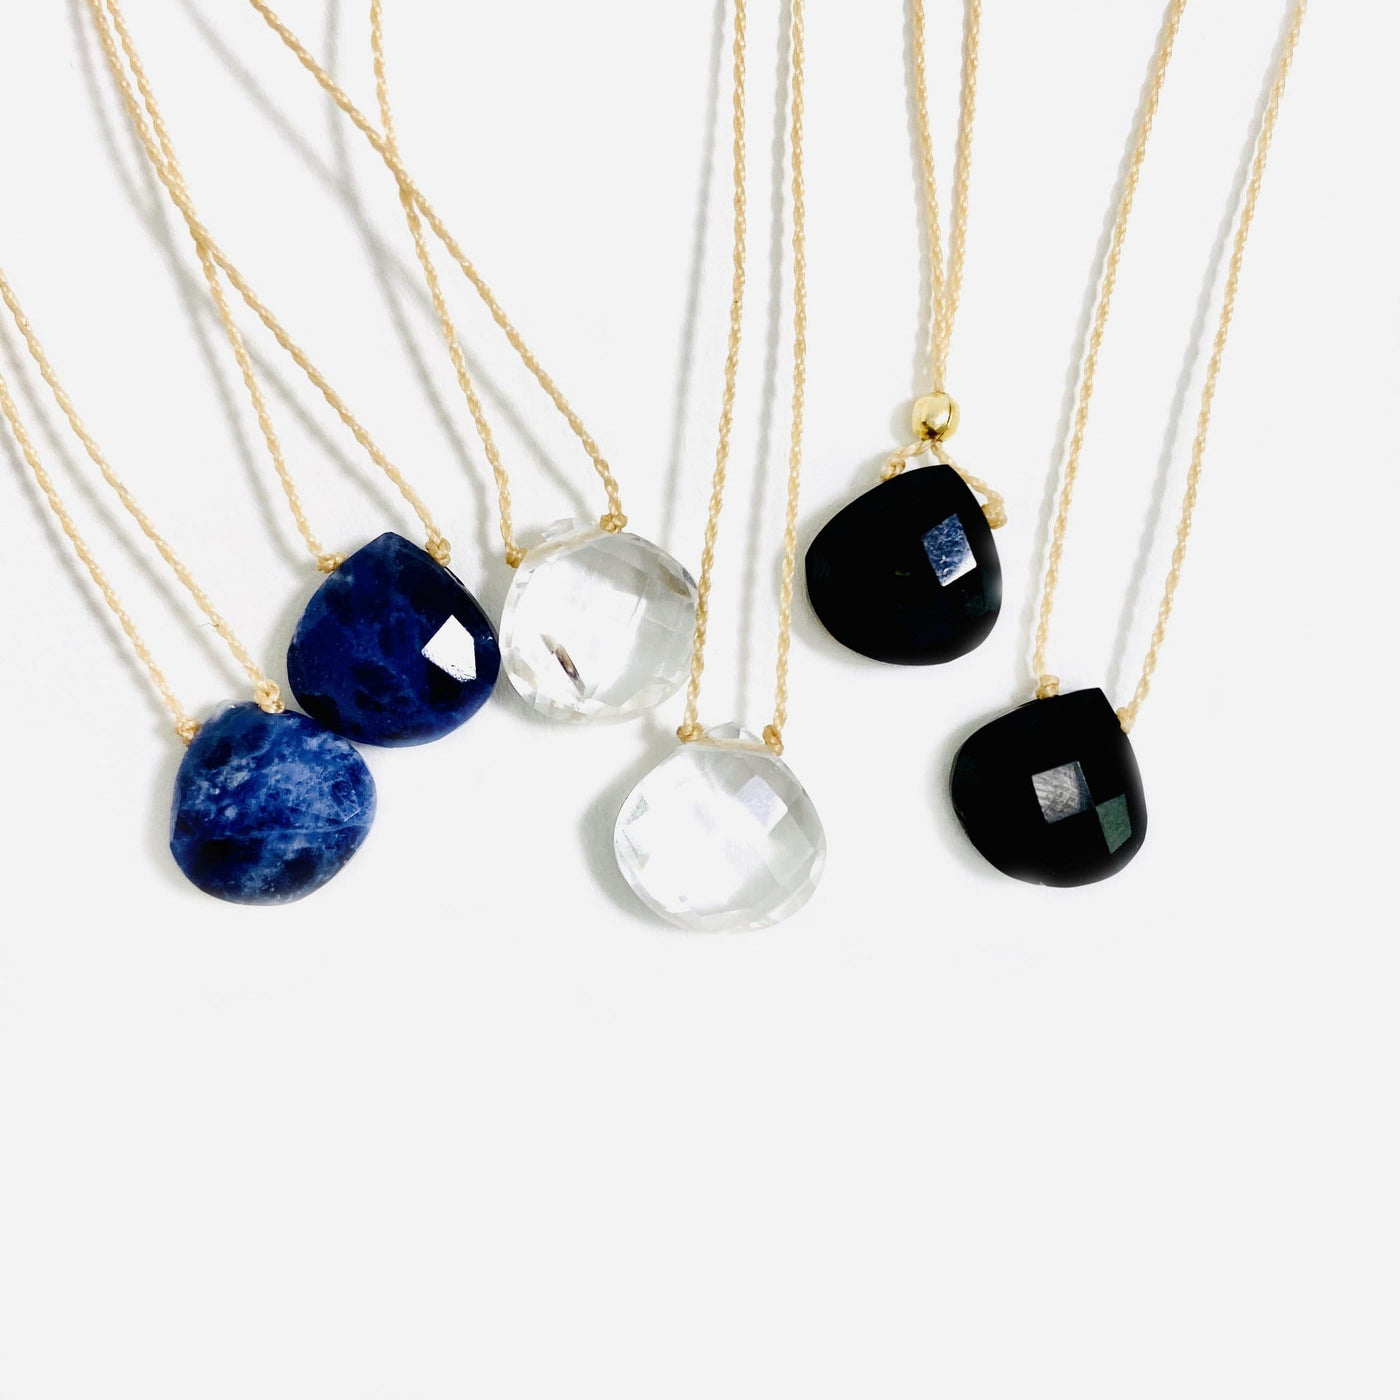 Gemstone Drop Bead Finished Necklaces in sodalite, crystal quartz and tourmaline